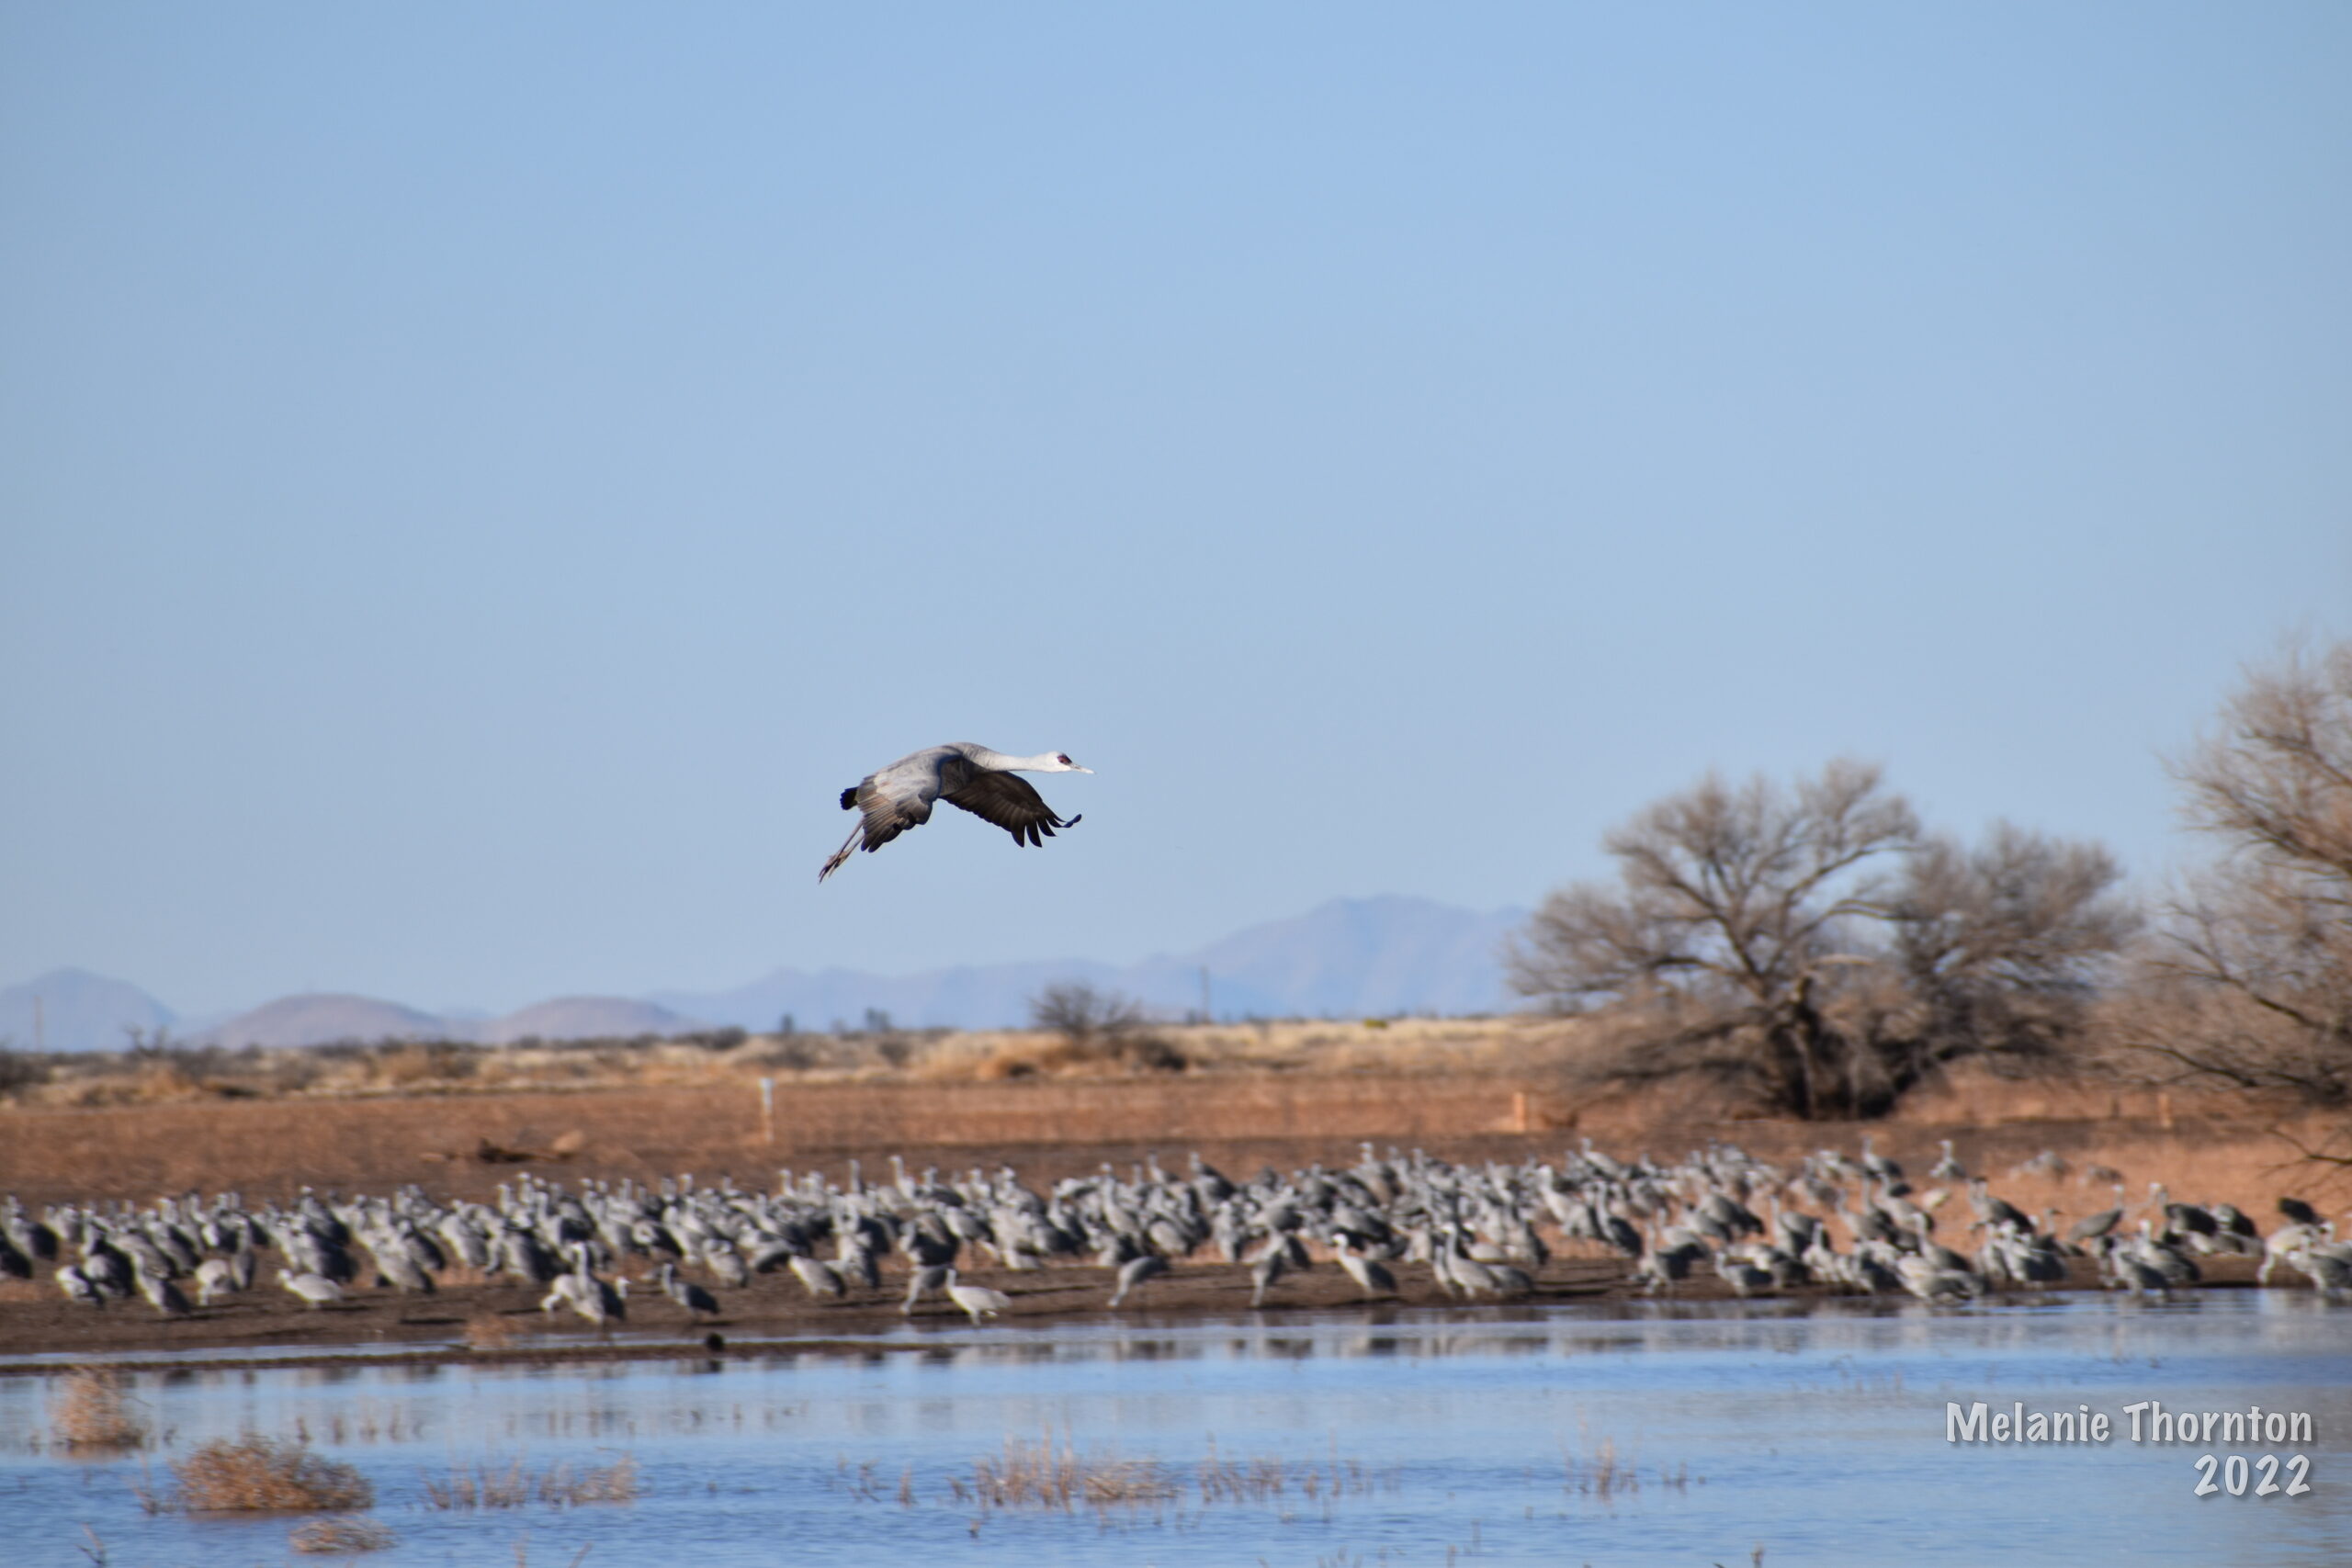 A large gray bird flies above the water. Behind it are hundreds of other large gray birds.